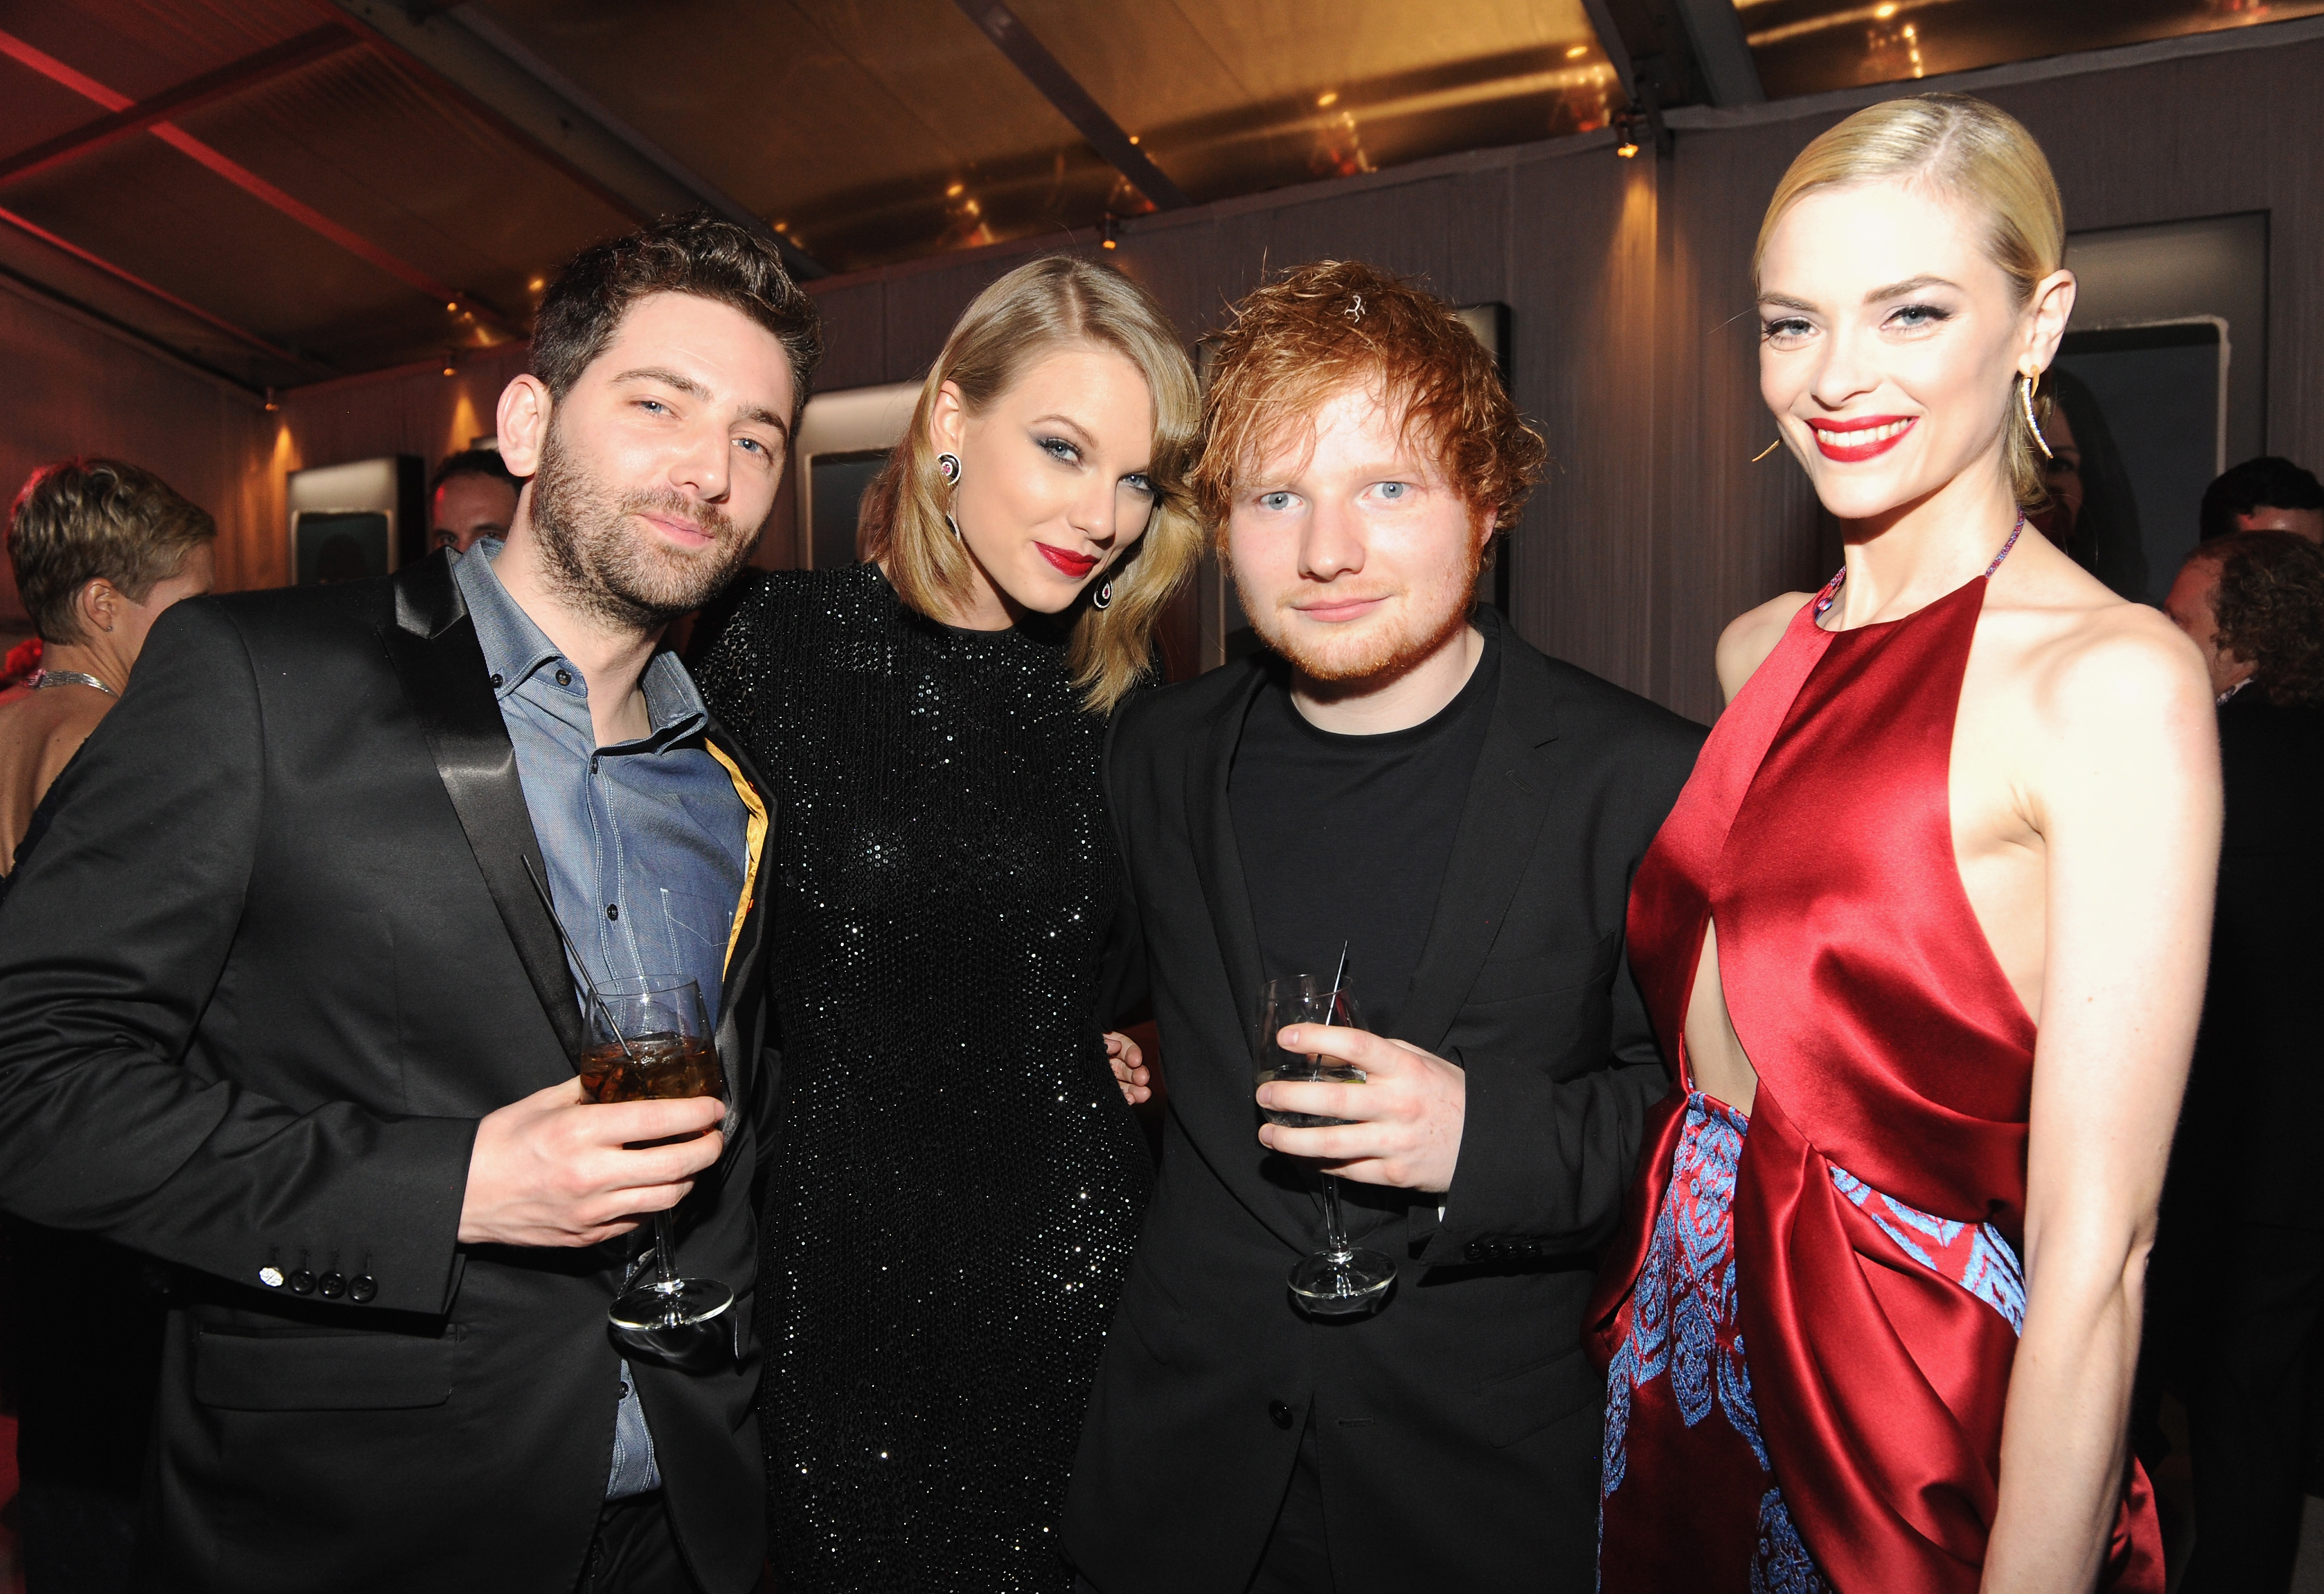 Taylor Swift and Ed Sheeran attend the 2014 Vanity Fair Oscar Party Hosted on March 2, 2014 in West Hollywood, Ca.